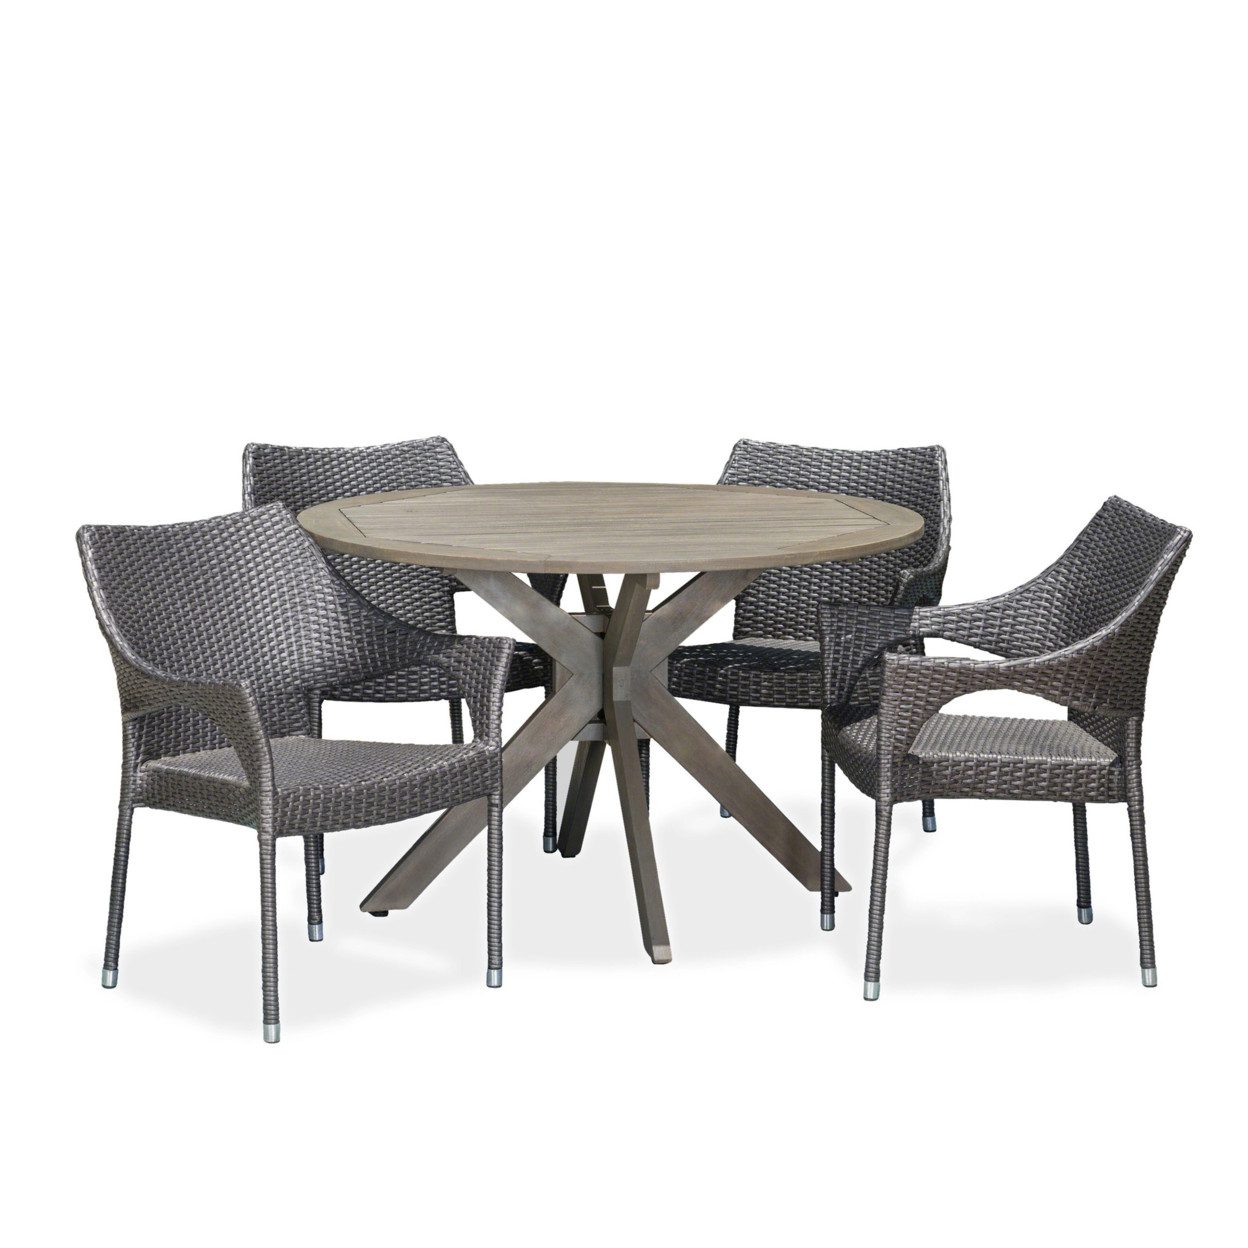 Lina Outdoor 5 Piece Wood And Wicker Dining Set, Gray And Gray